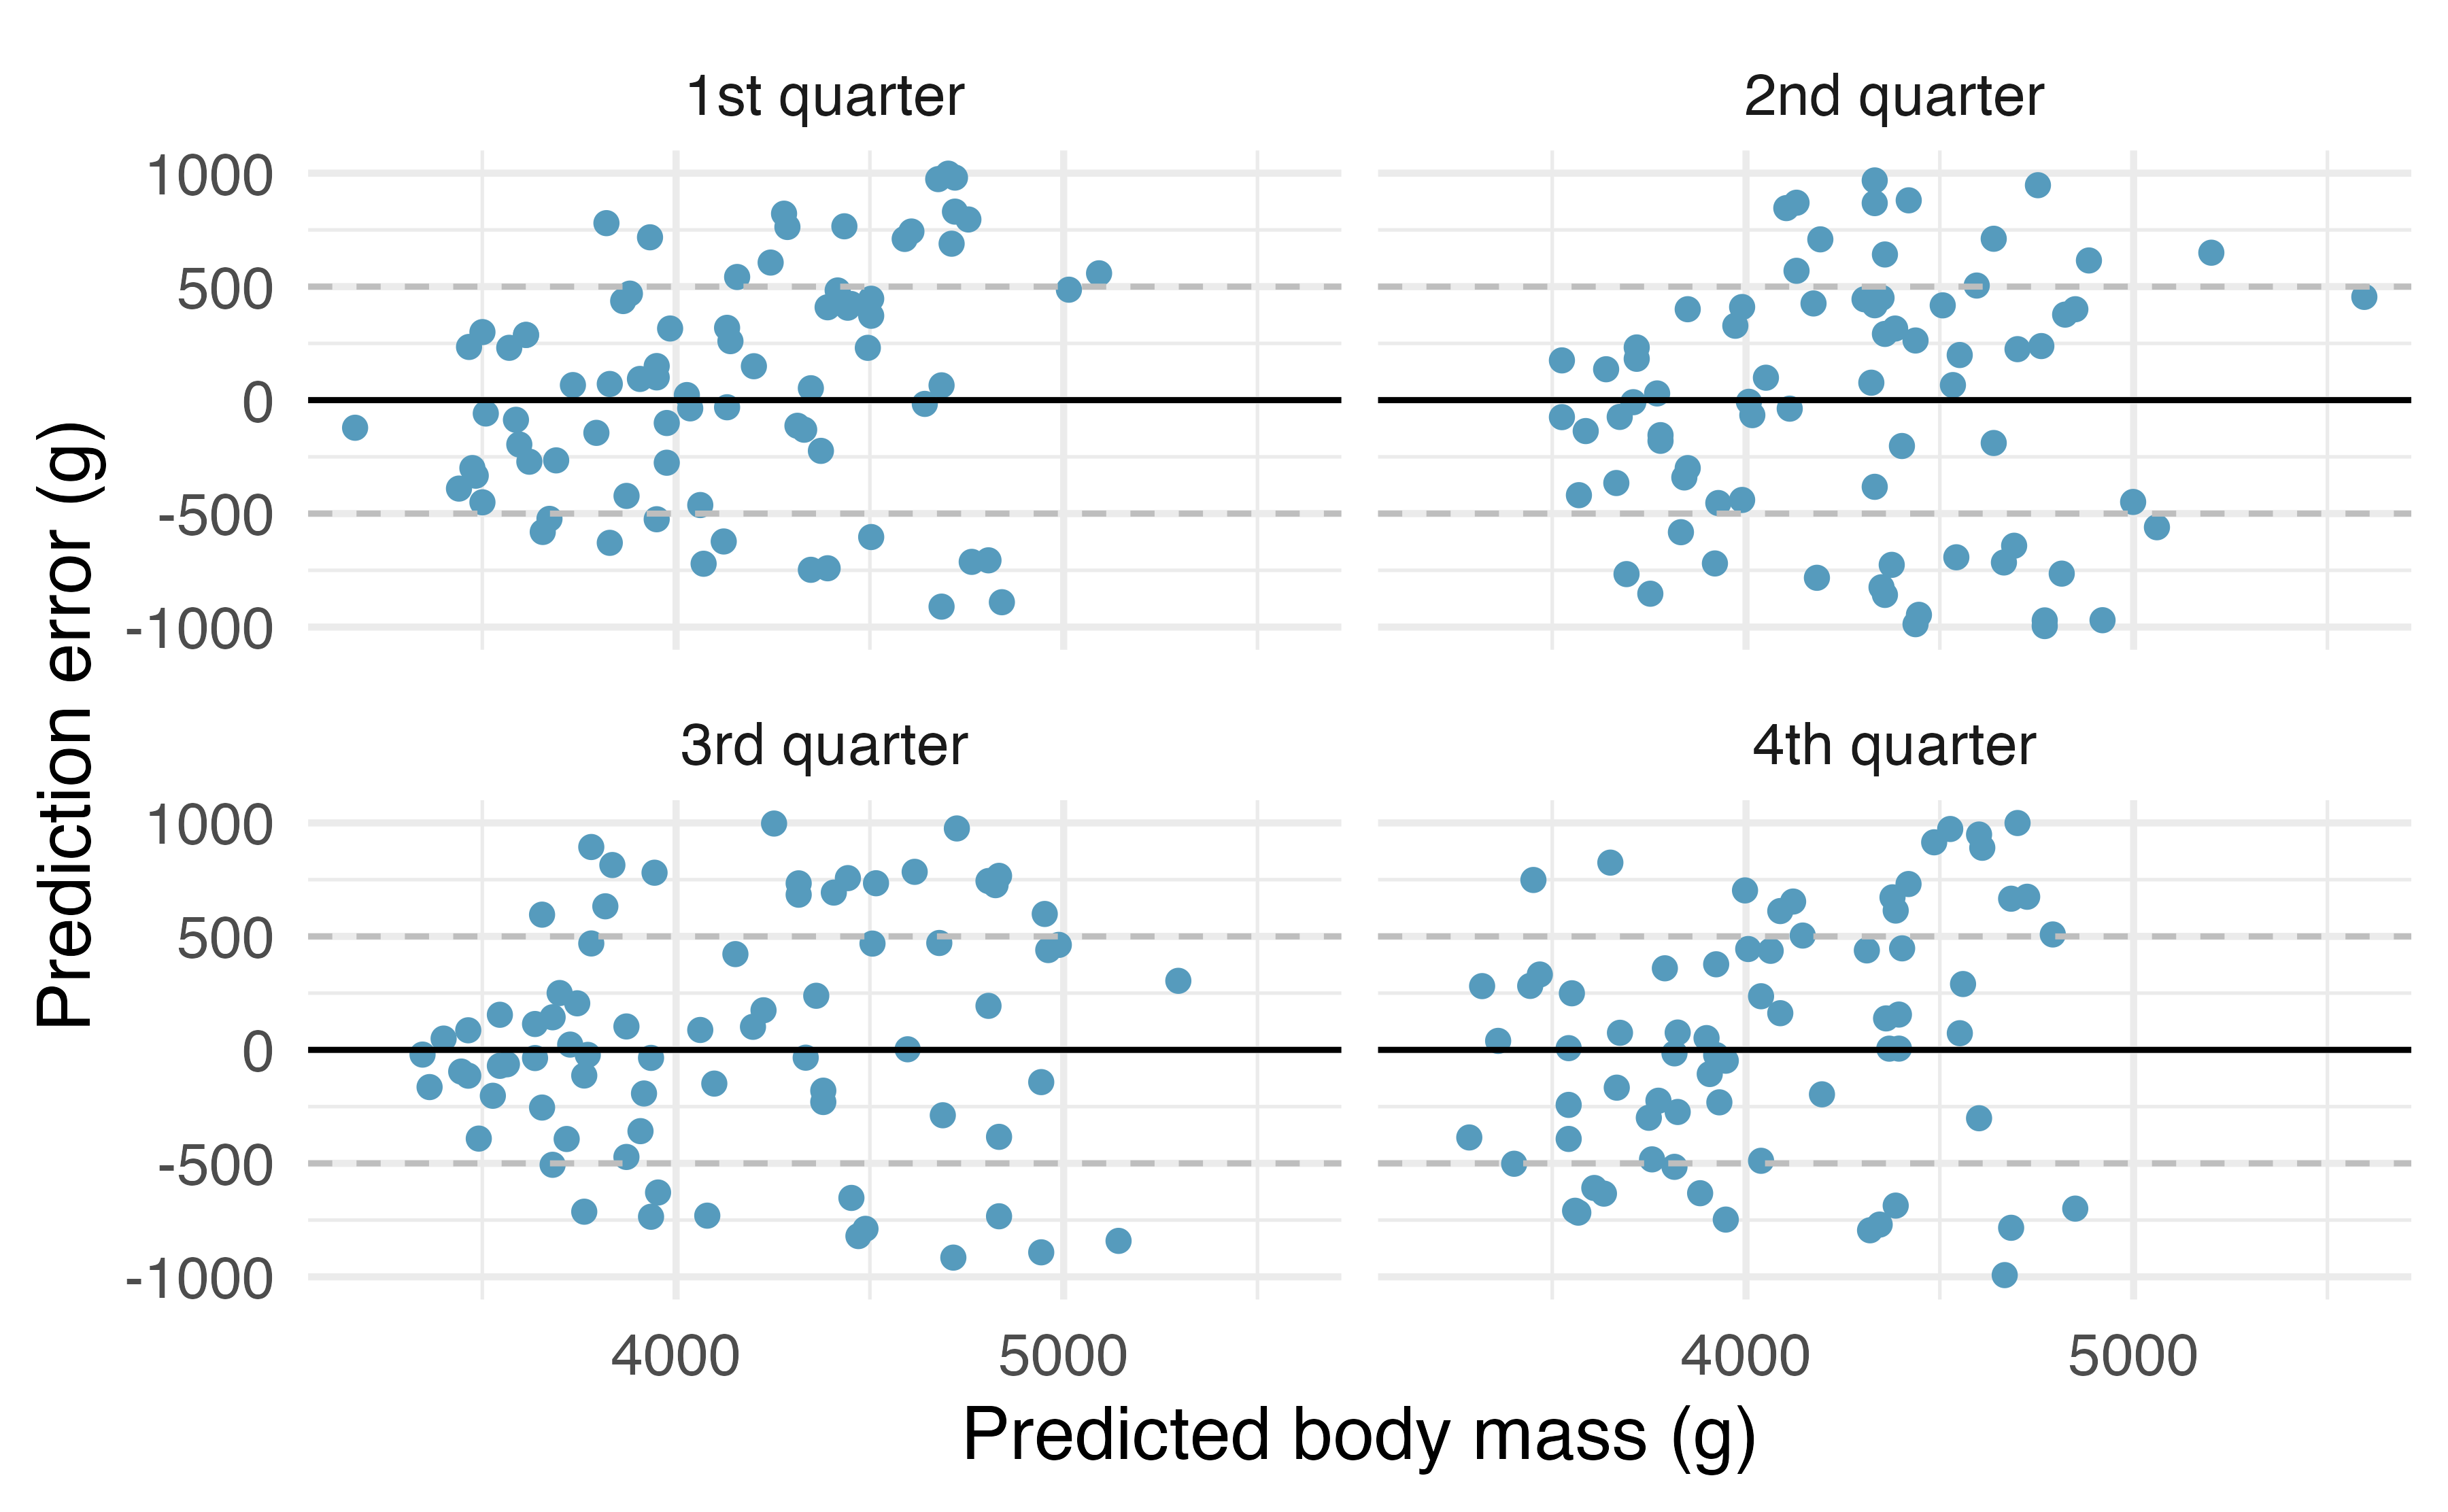 One quarter at a time, the data were removed from the model building, and the body mass of the removed penguins was predicted. The least squares regression model was fit independently of the removed penguins.  The predictions of body mass are based on bill length only. The x-axis represents the predicted value, the y-axis represents the error (difference between predicted value and actual value).